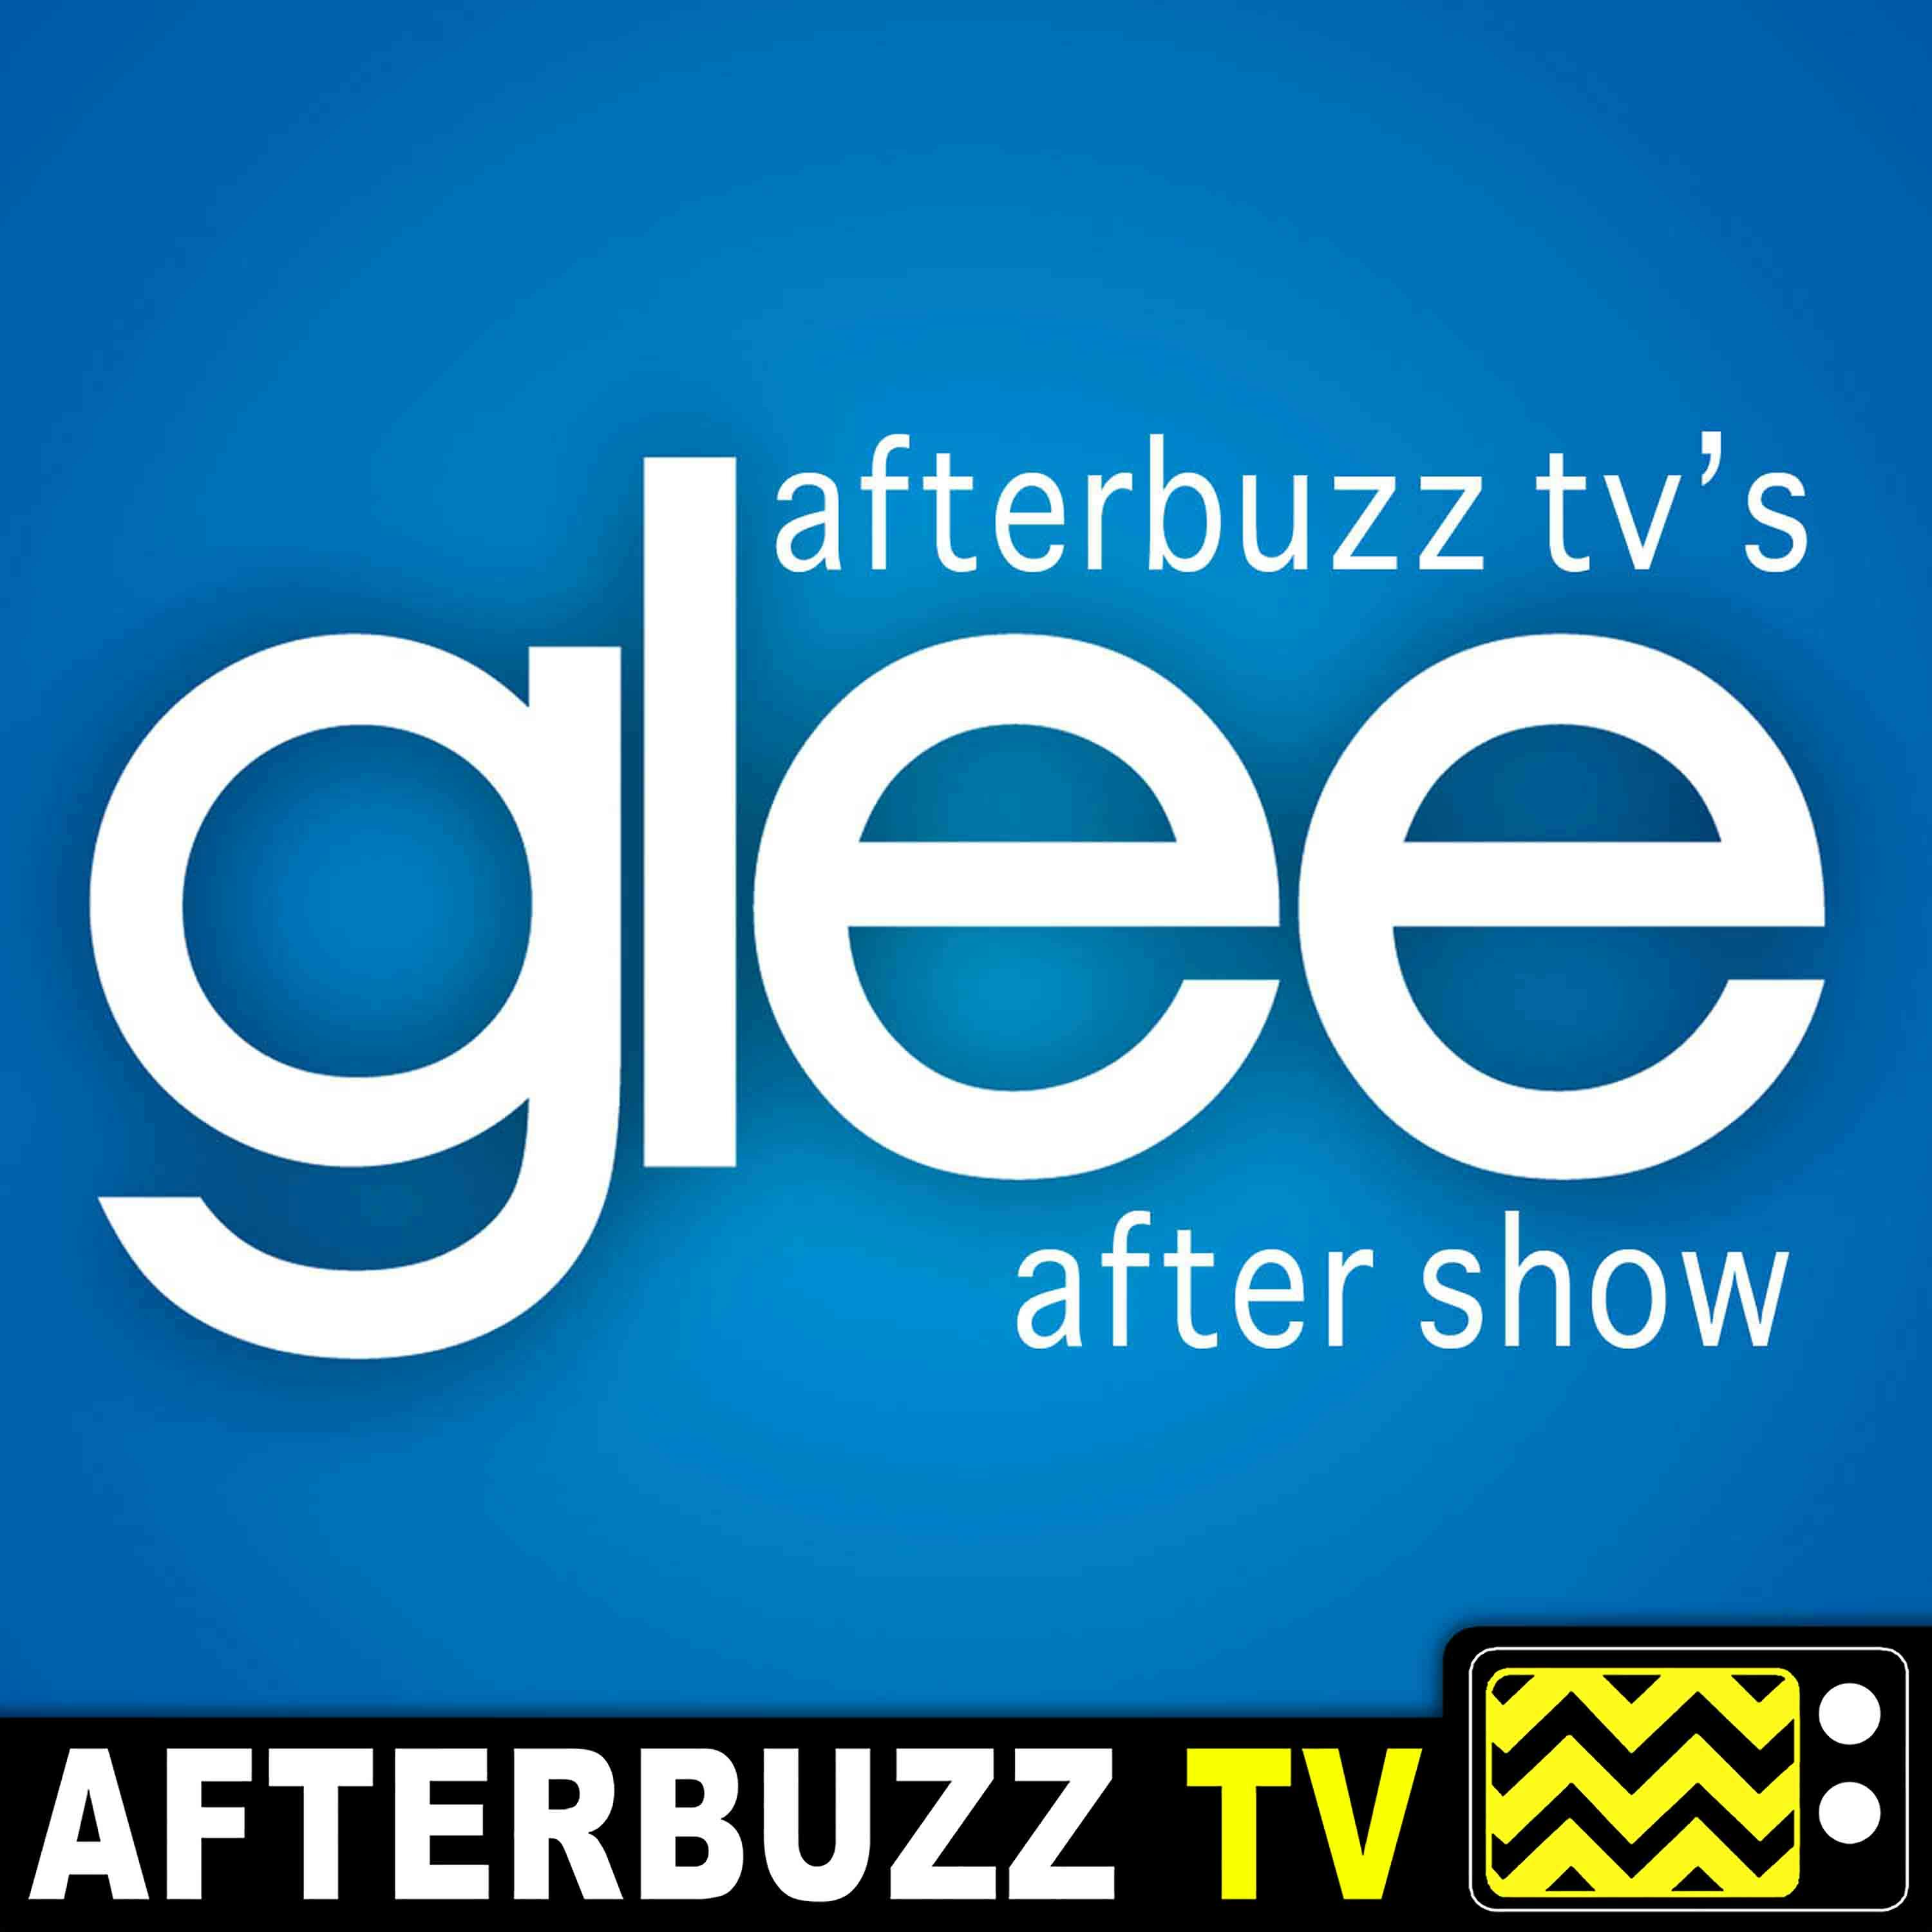 Glee S:5 | The Untitled Rachel Berry Project E:20 | AfterBuzz TV AfterShow